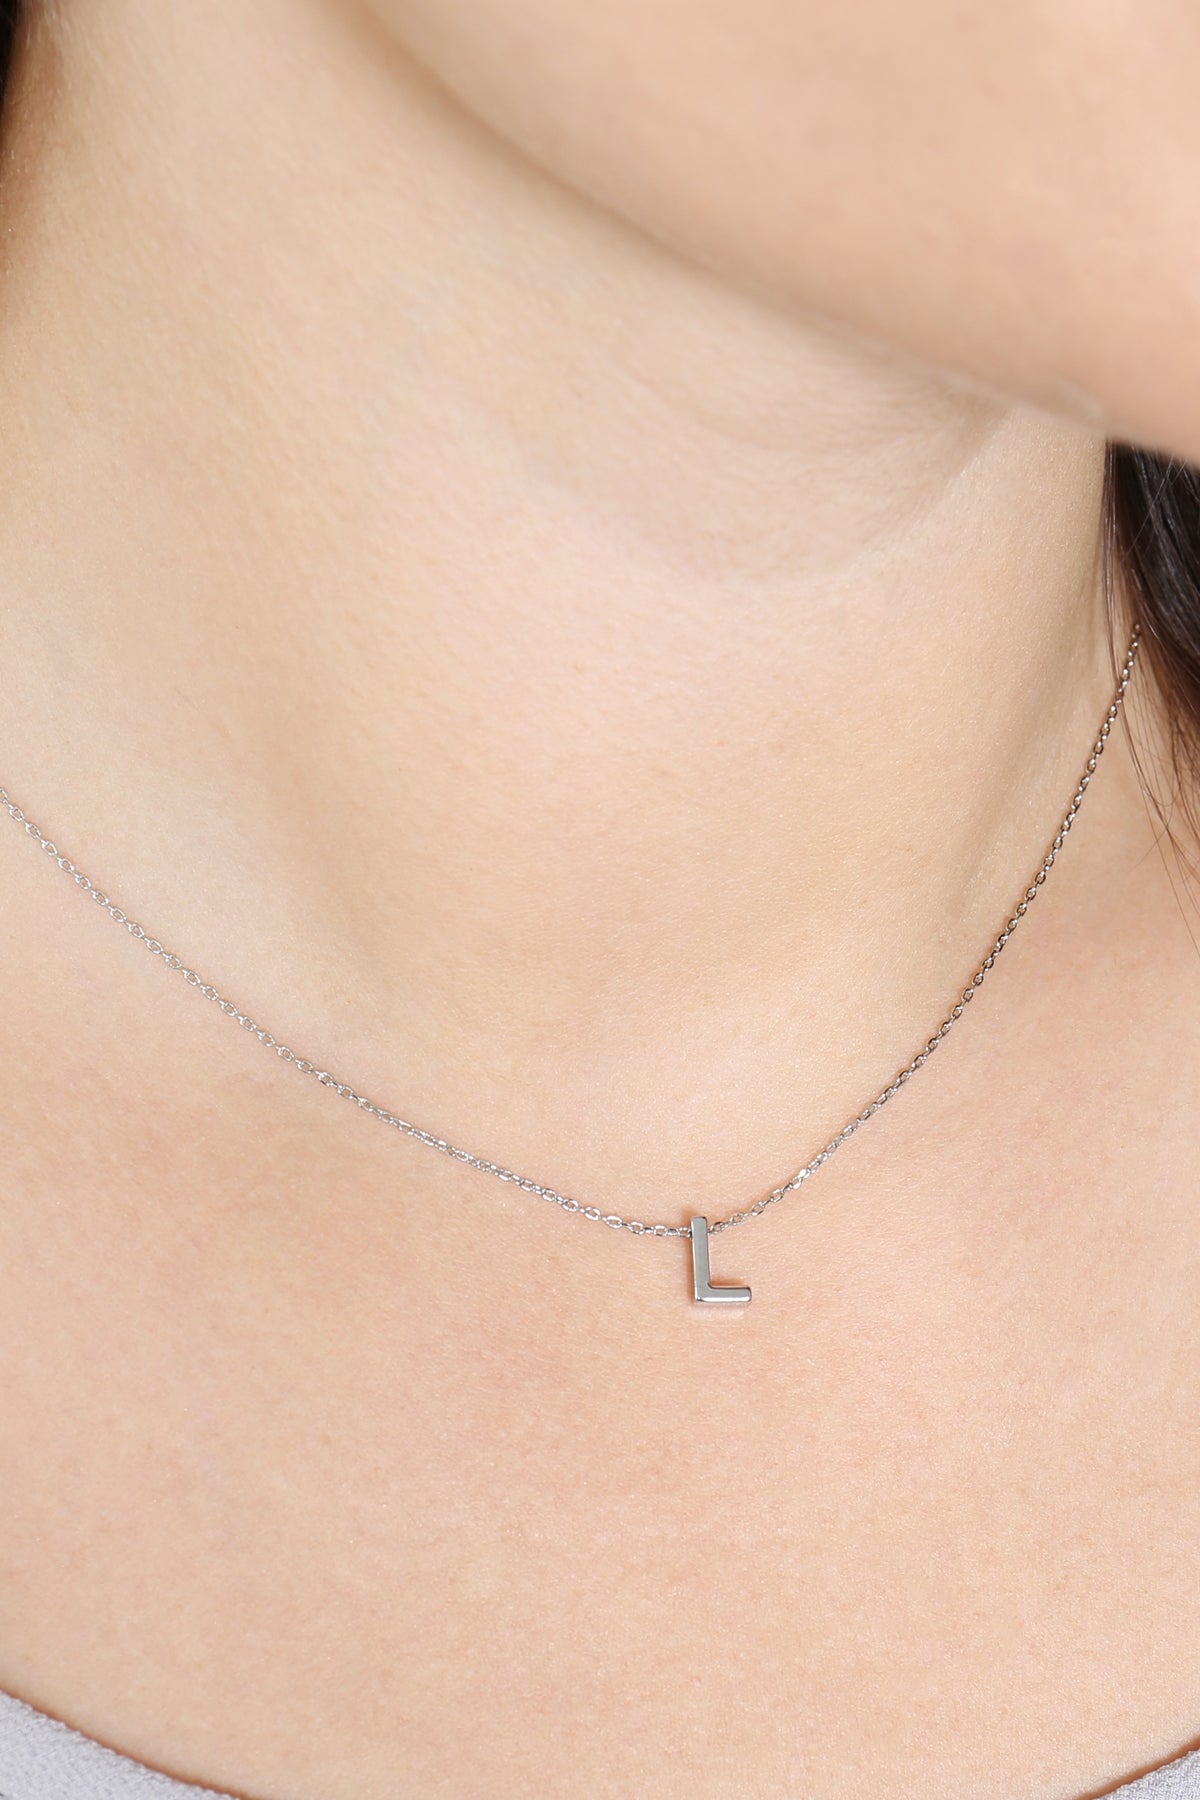 "L" INITIAL DAINTY CHARM NECKLACE